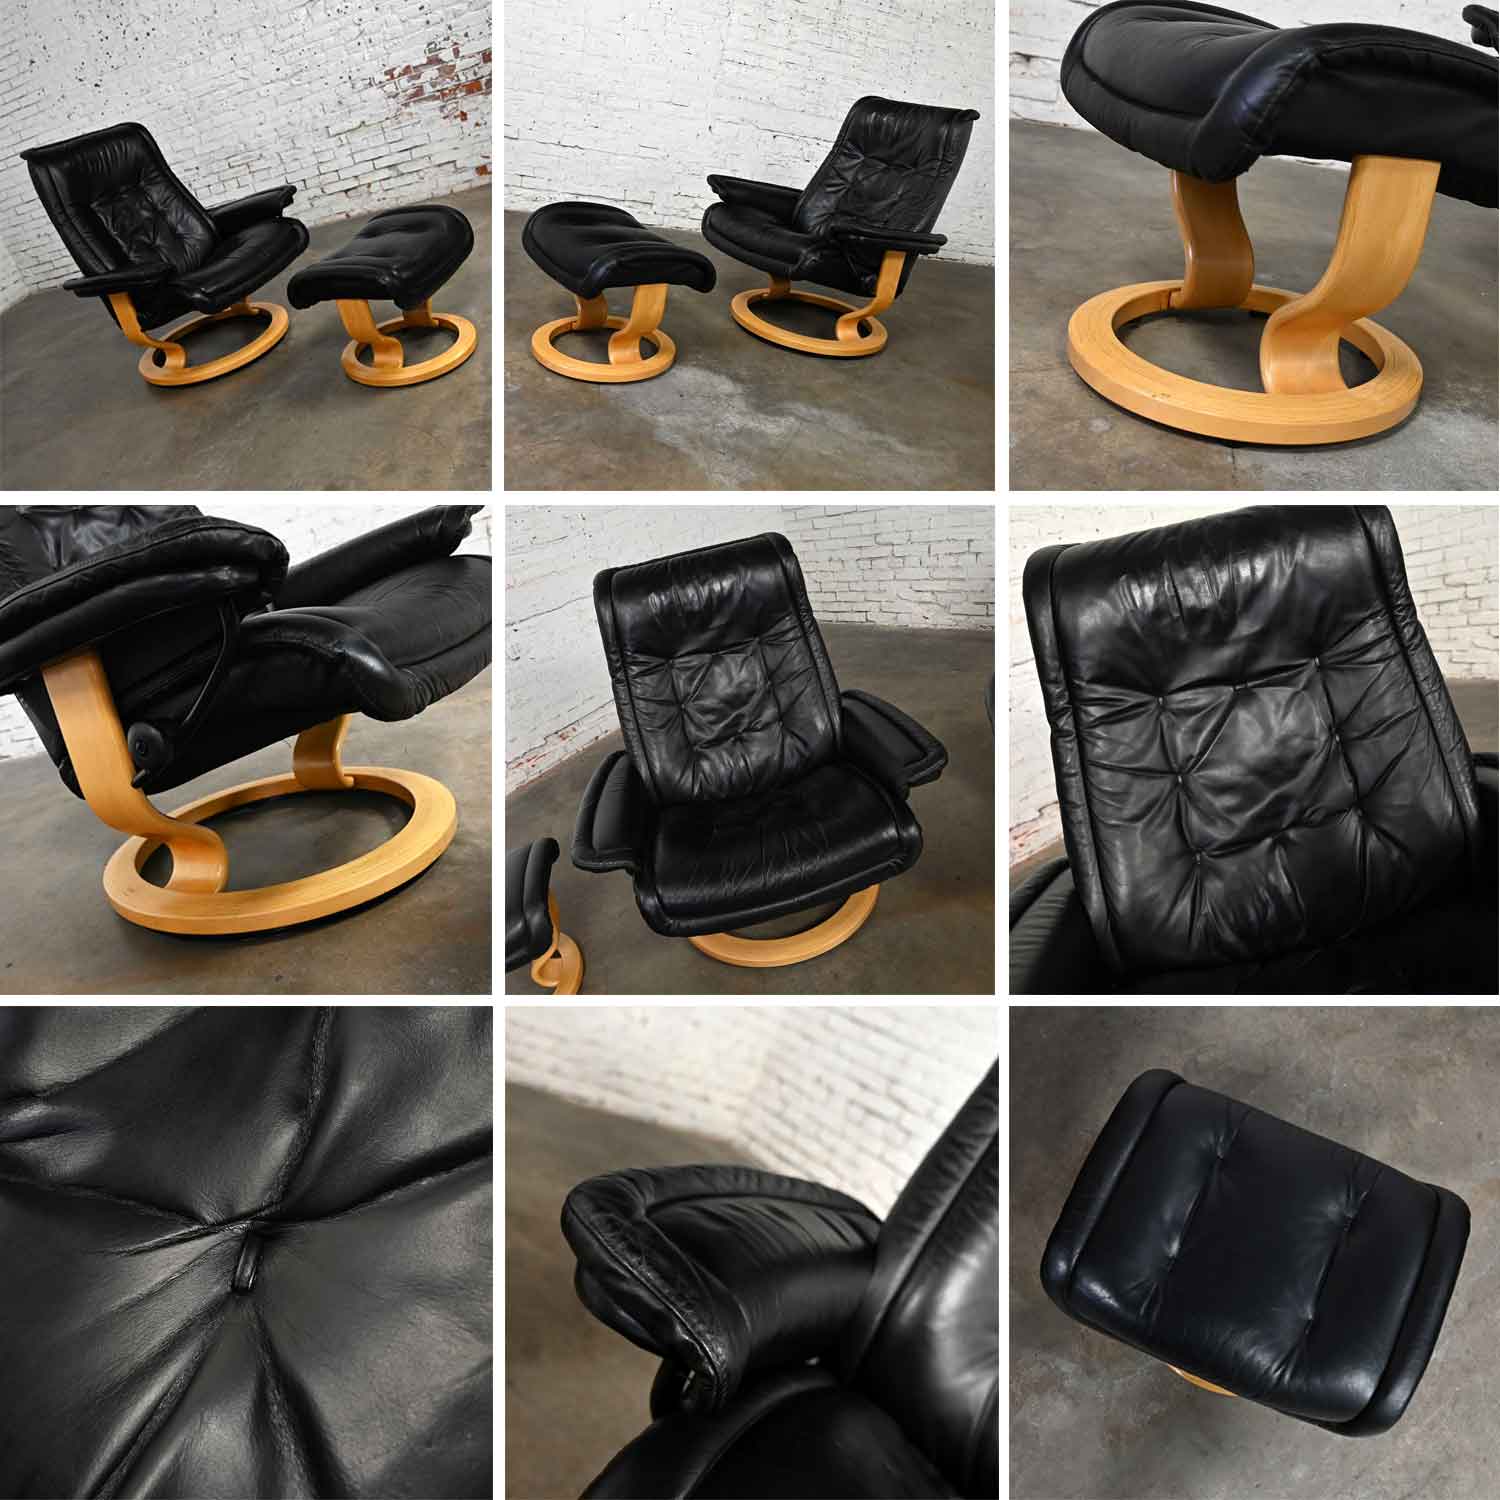 Late 20th Century Ekornes Stressless Royal Recliner Black Leather Lounge Chairs and Ottomans a Pair